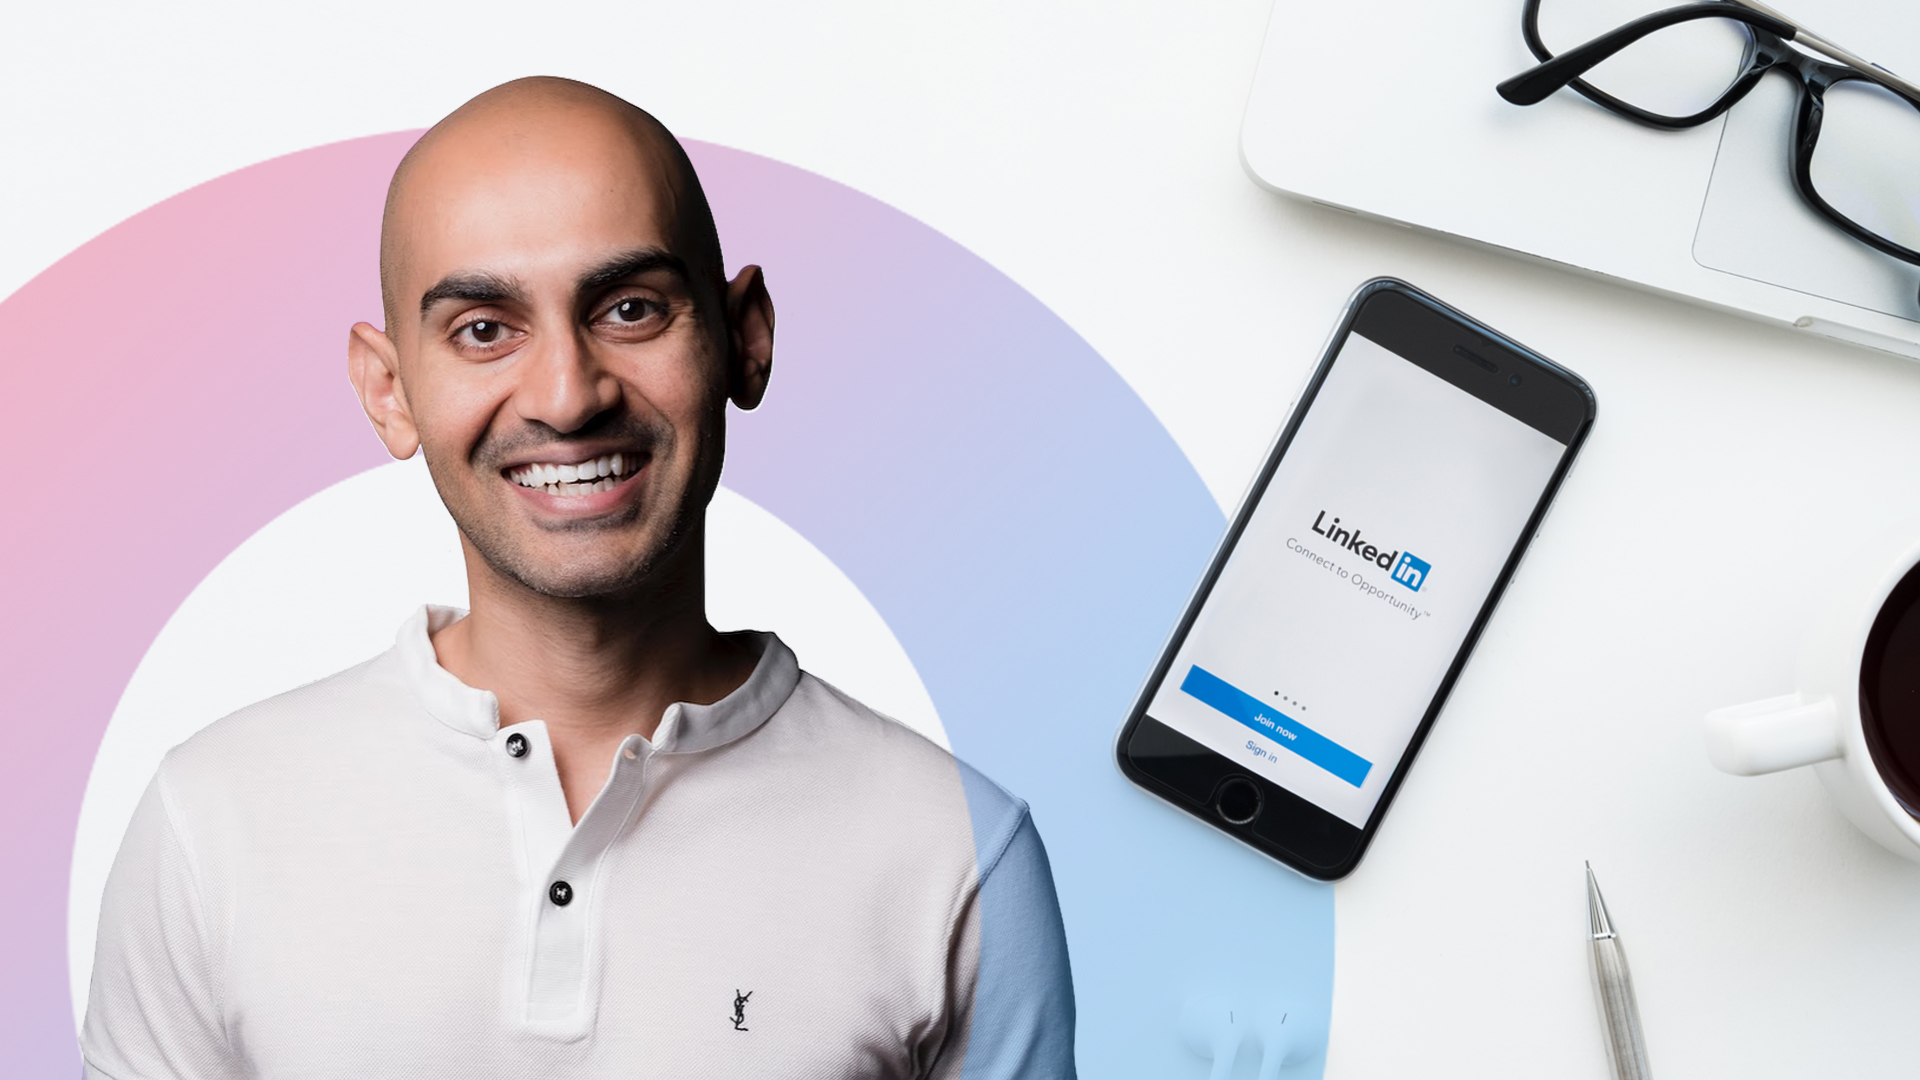 Neil Patel head of Ubersuggest Transition from Blogs YouTube to LinkedIn Dubai ICON